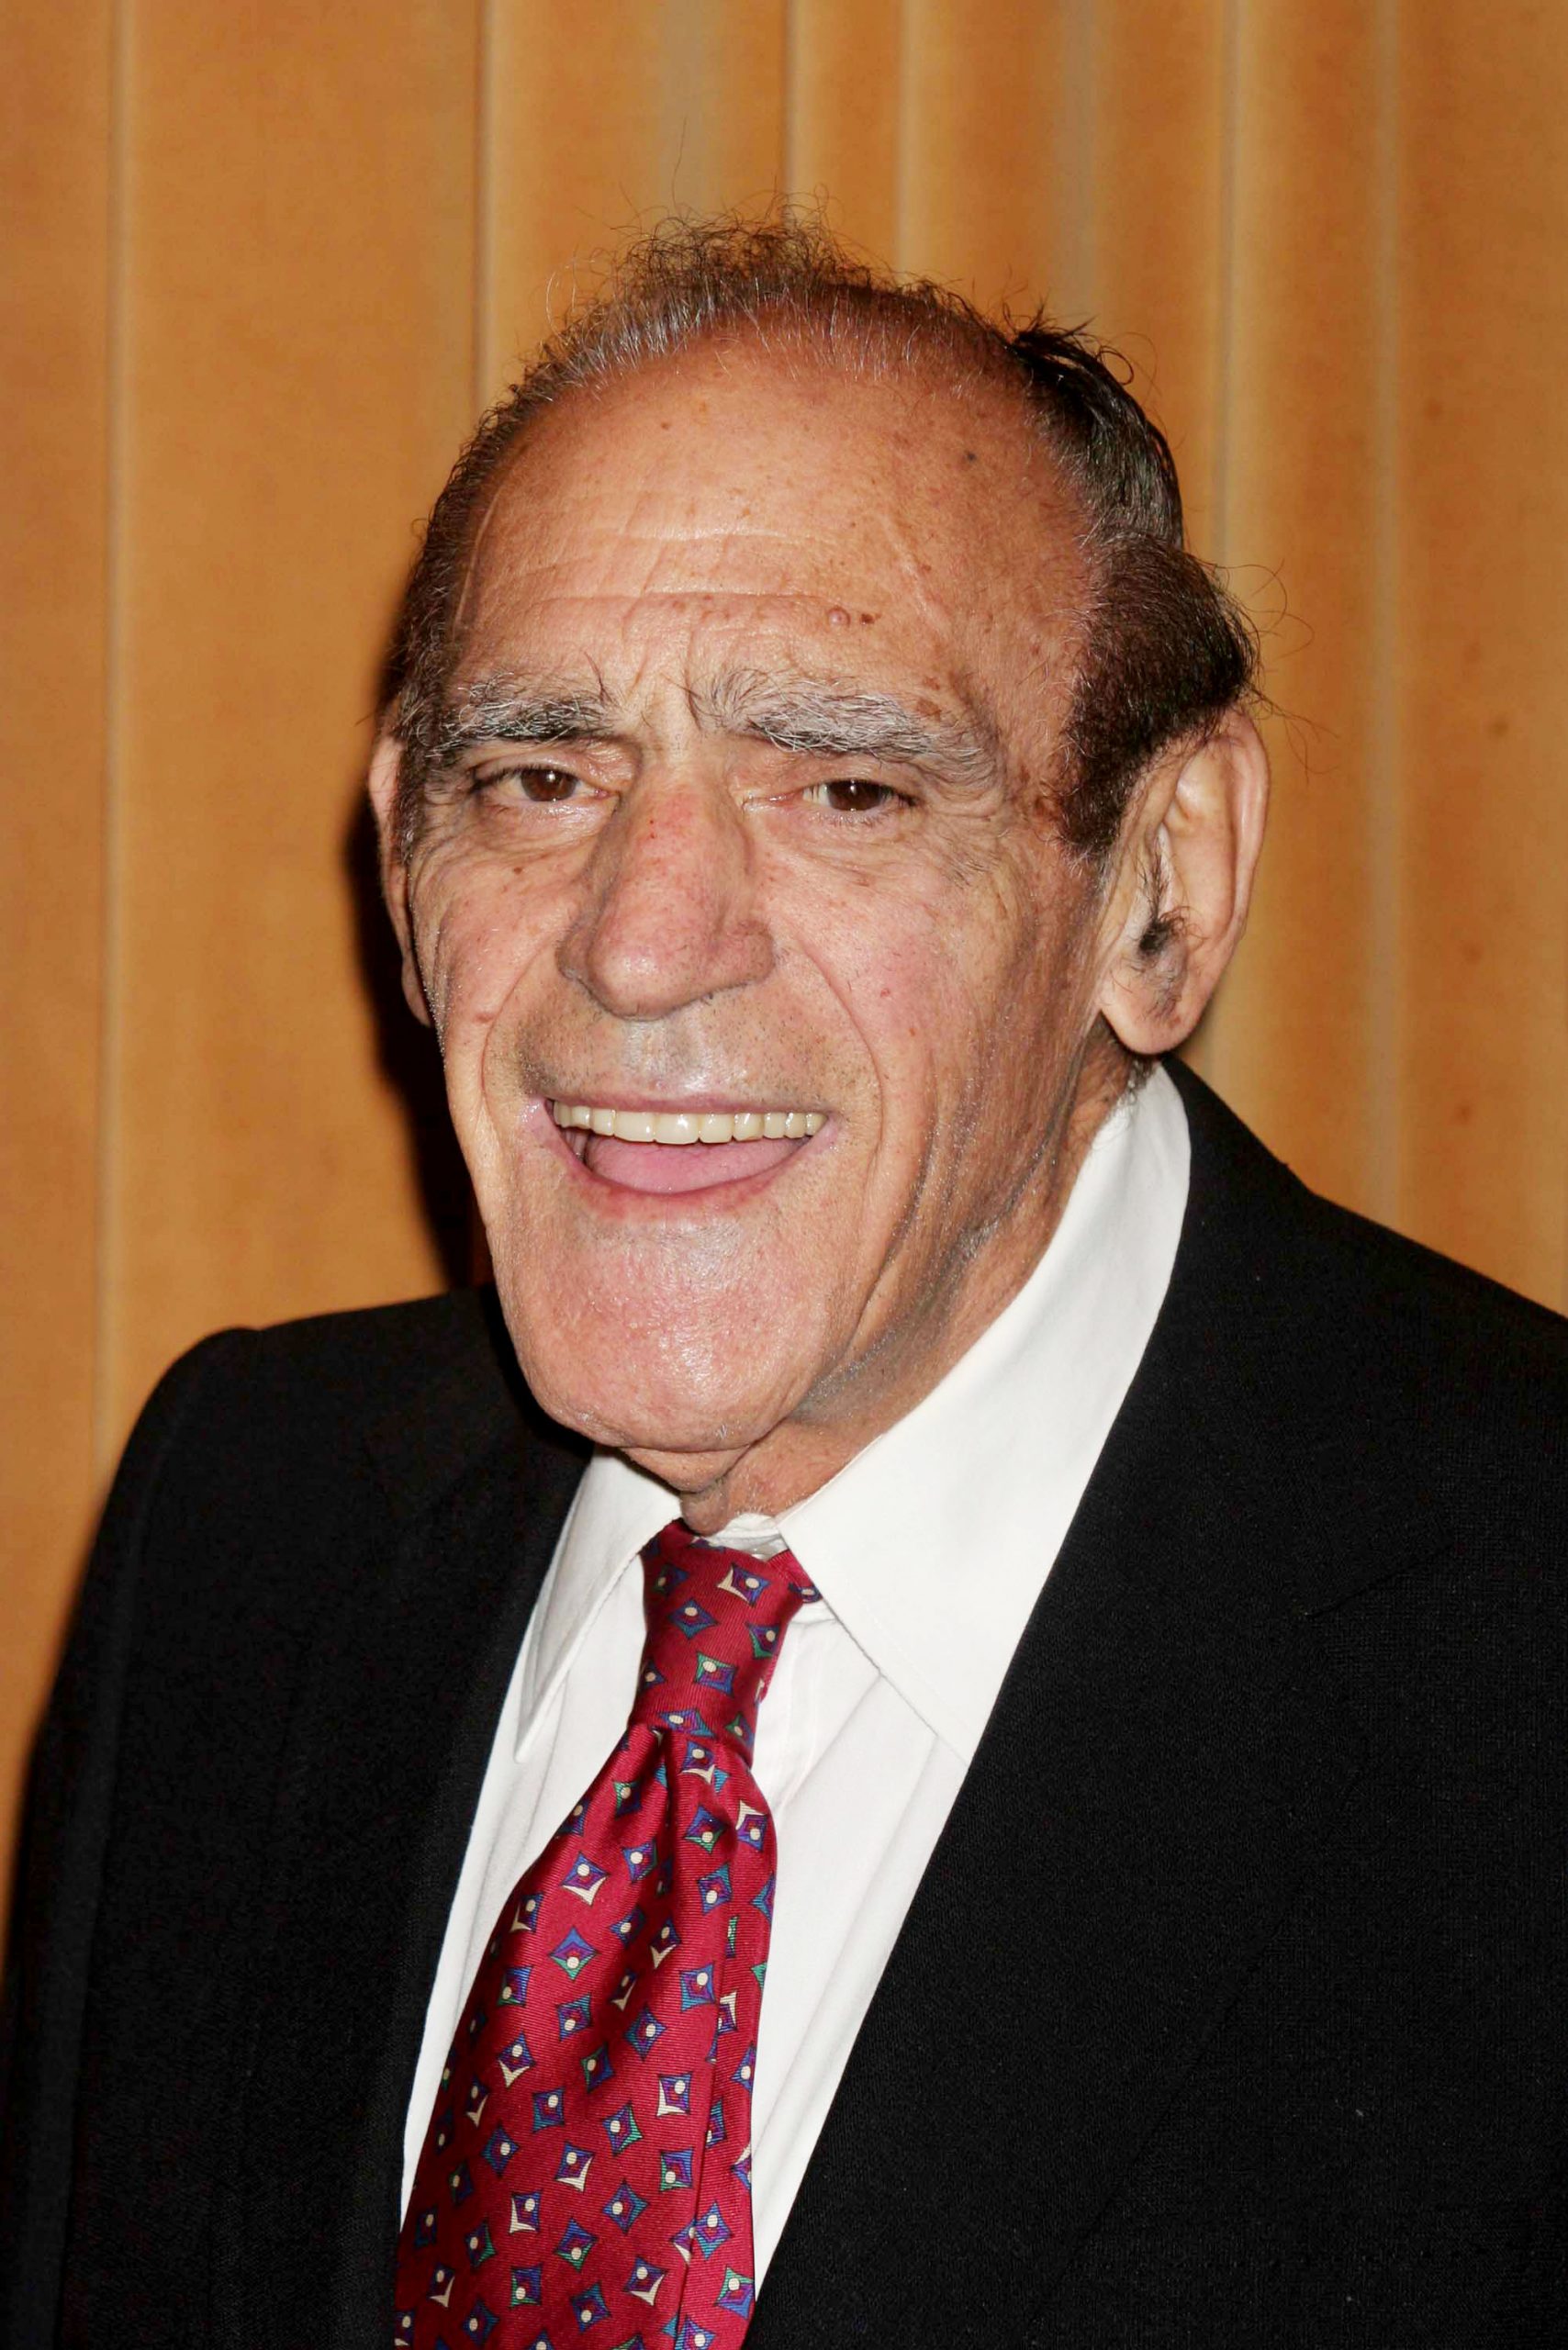 Abe Vigoda made joking references to inaccurate stories about his death